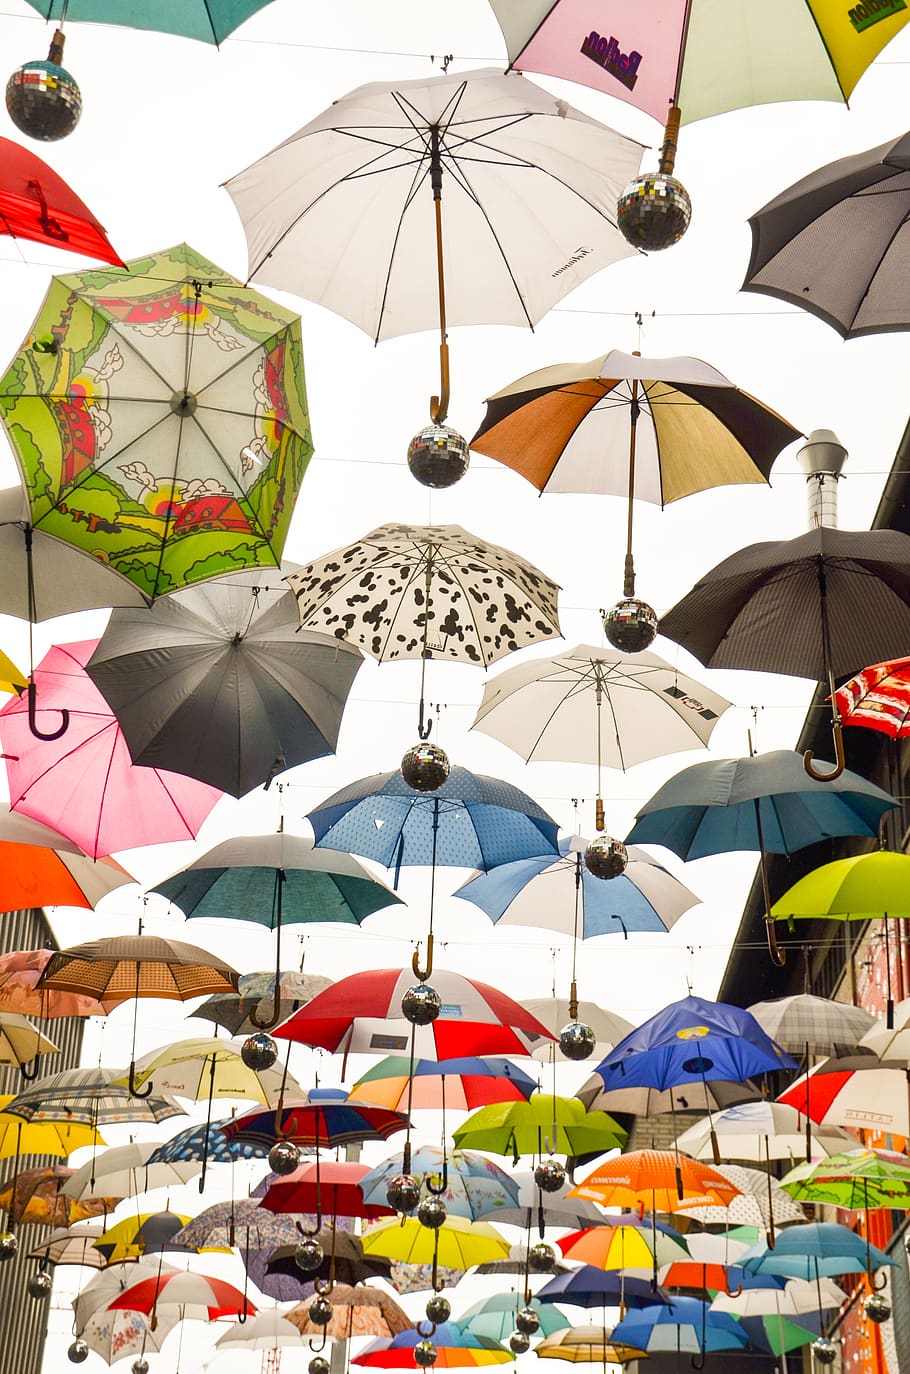 umbrella, protection, parasol, rainy weather, april weather, screens, art, colorful, roof, shade tree